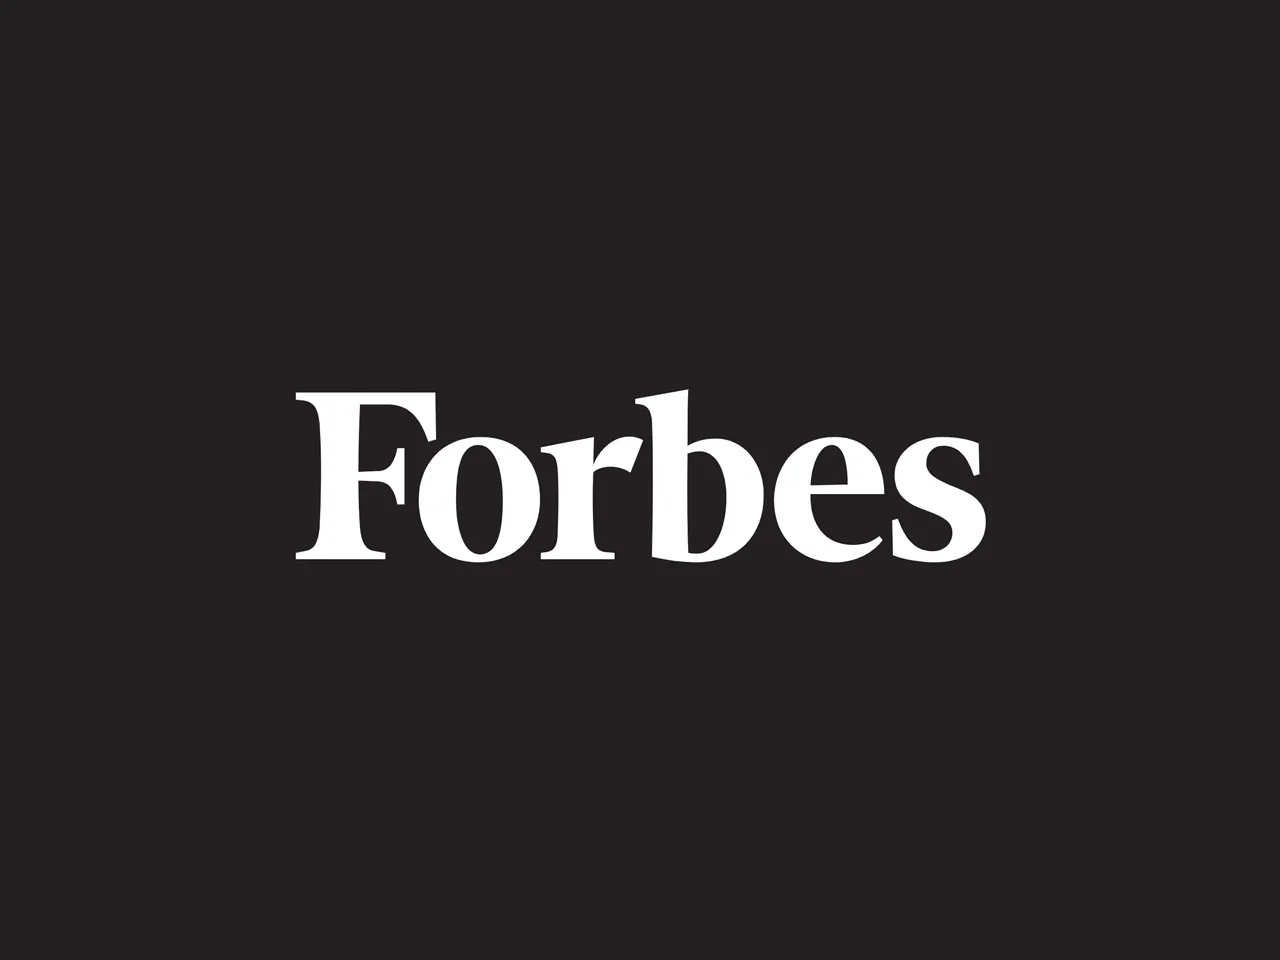 Forbes International accused of placing ads on dubious subdomain